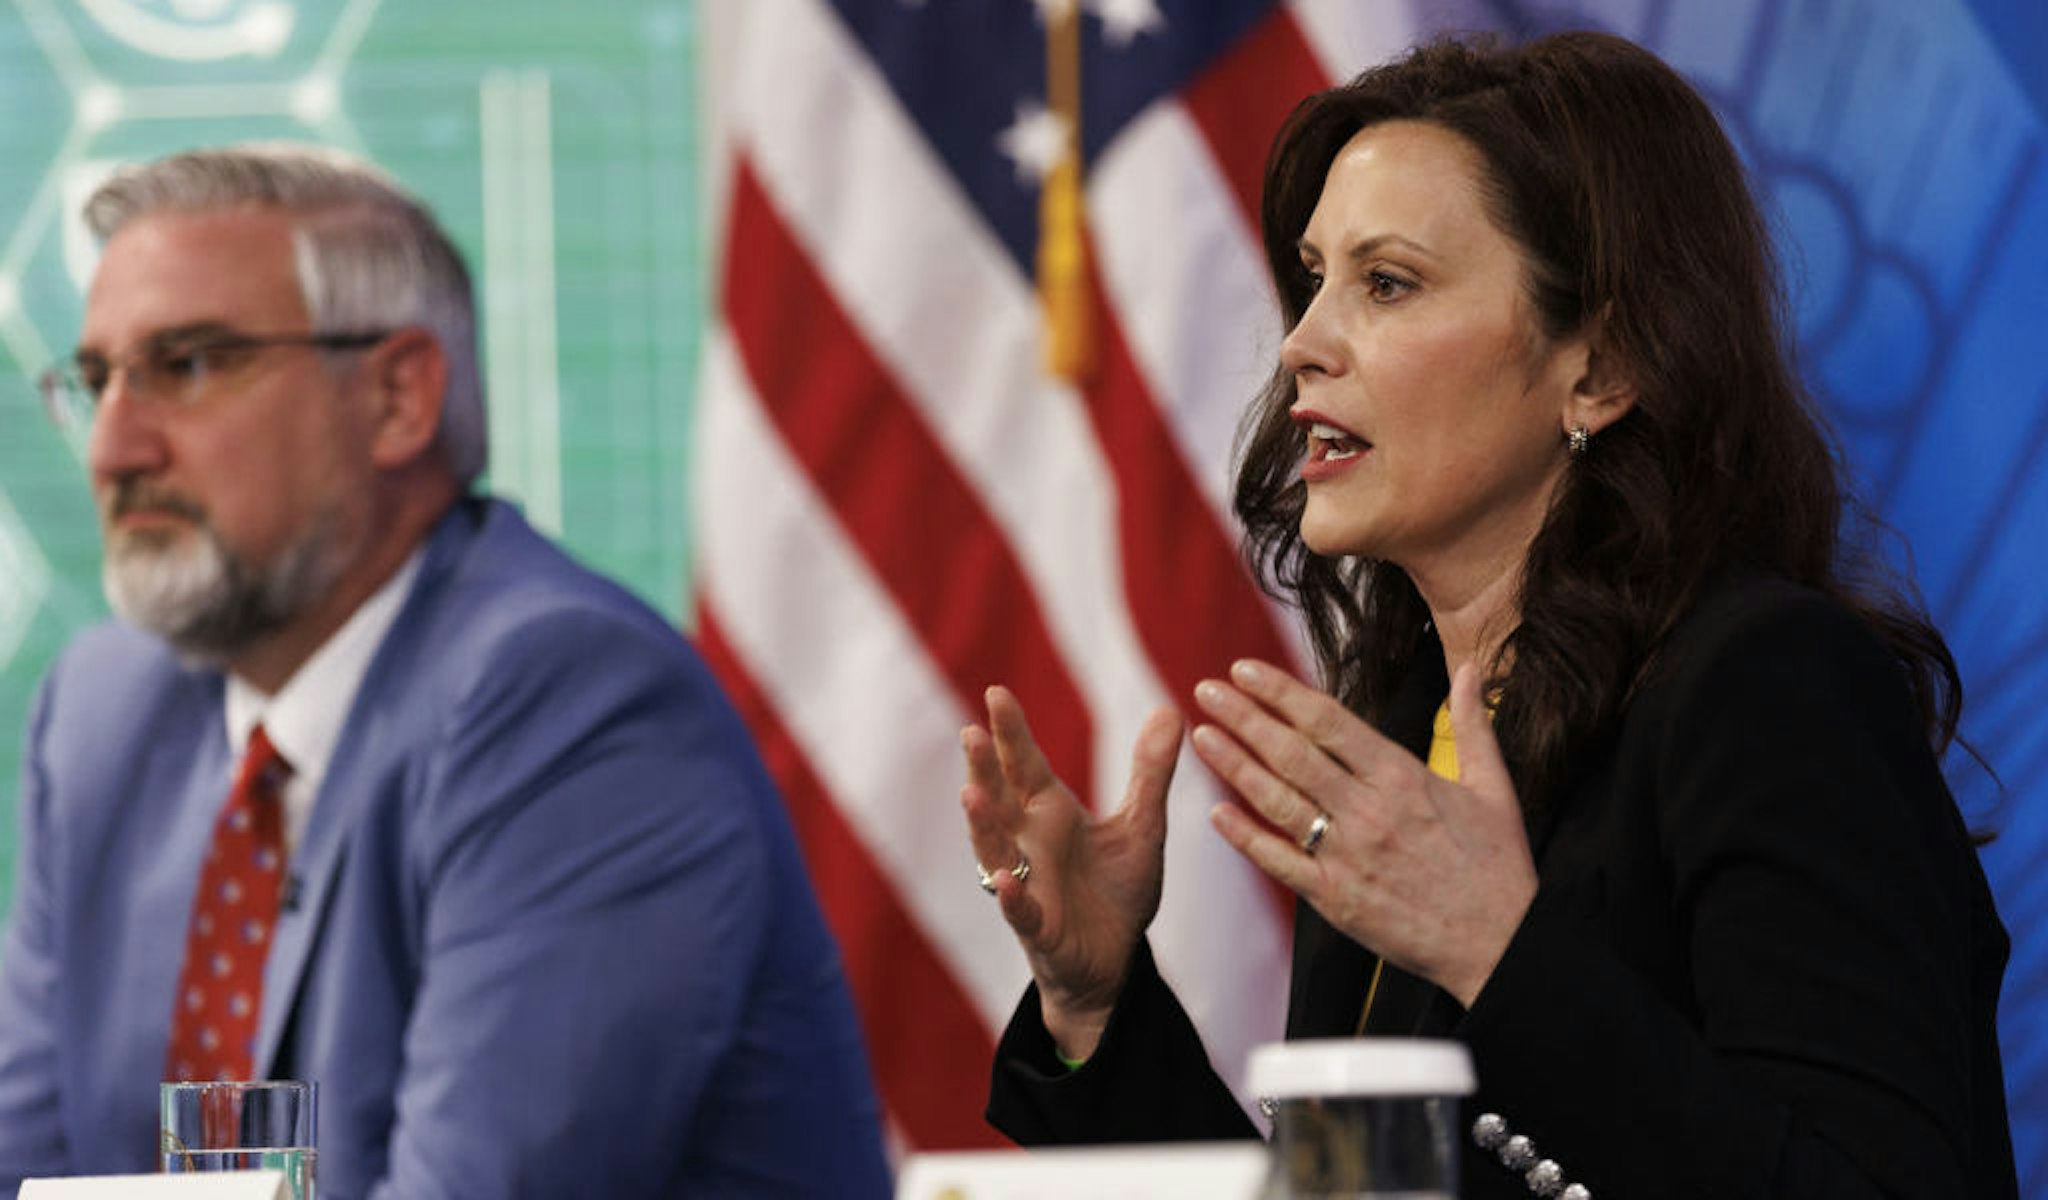 Gretchen Whitmer, governor of Michigan, speaks during a meeting with U.S. President Joe Biden, business leaders and governors in the Eisenhower Executive Office Building in Washington, D.C., U.S., on Wednesday, March 9, 2022. The Biden administration's long-awaited executive order for government agencies to take a closer look at issues surrounding the crypto market is being celebrated by industry participants despite it lacking a clear path on possible regulation. Photographer: Ting Shen/Bloomberg